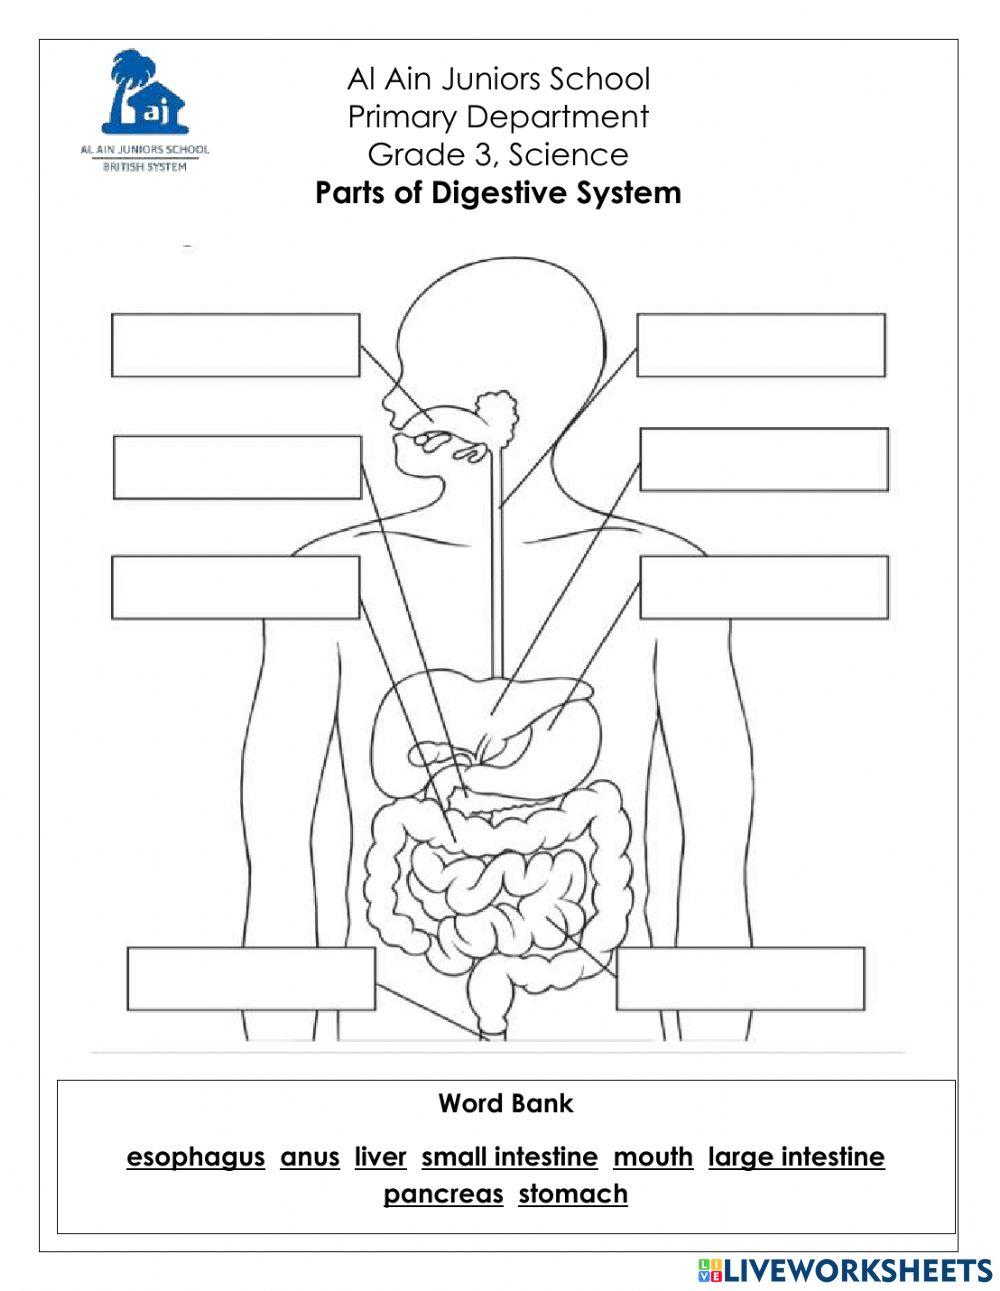 Basic Parts of Digestive System